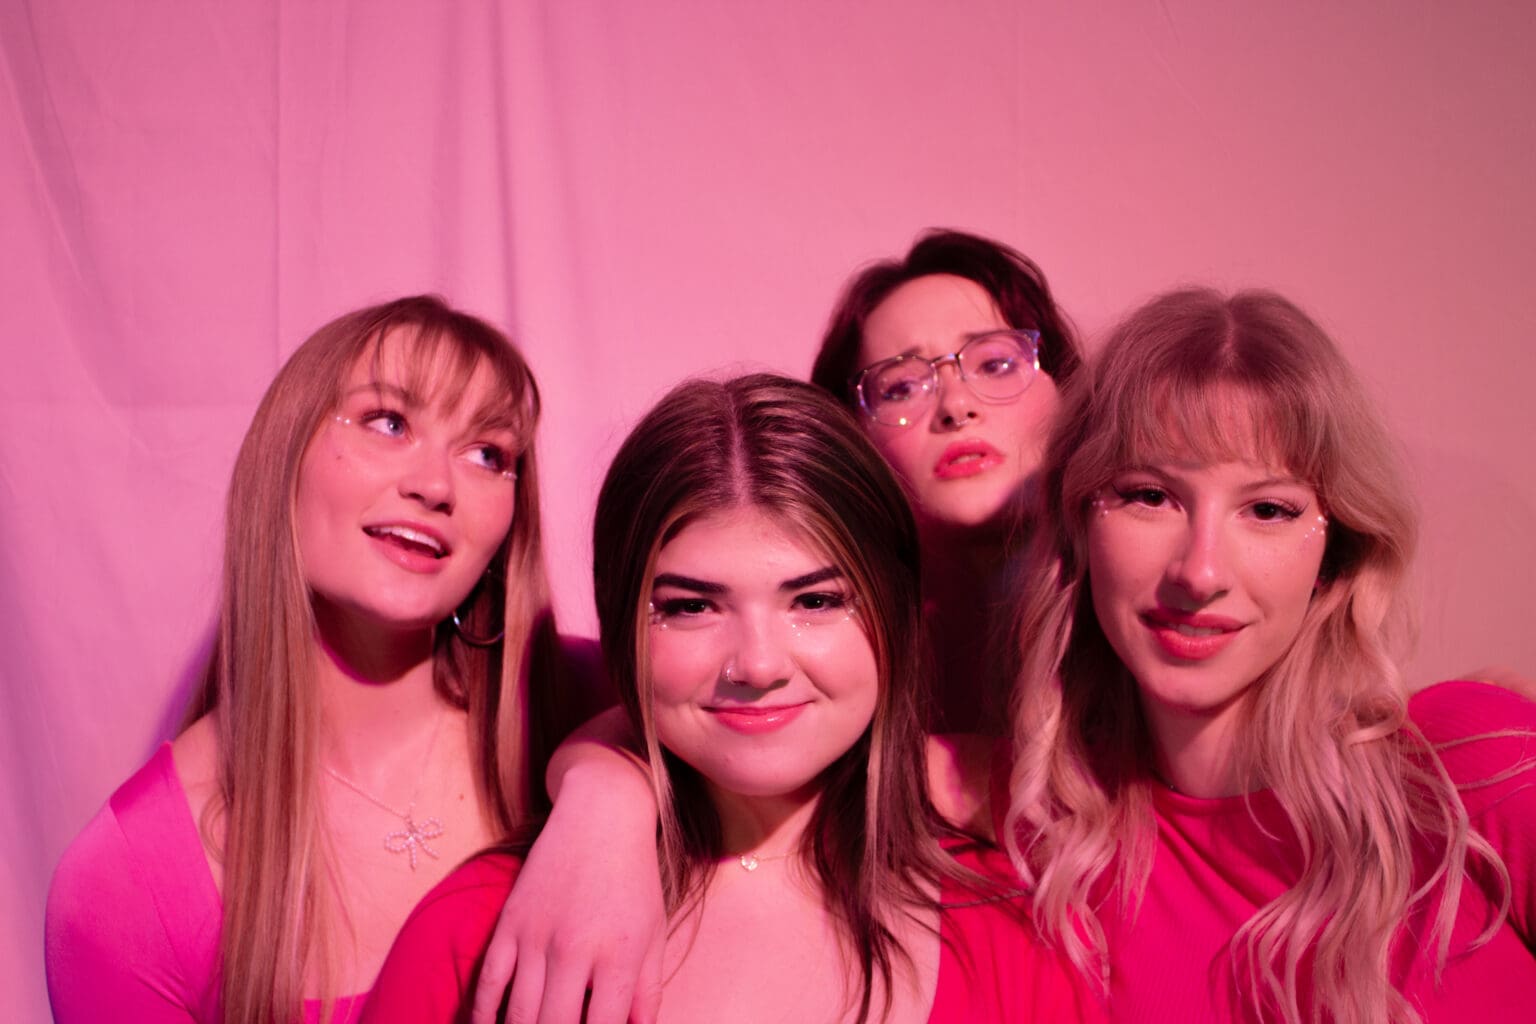 The cast of "Mean Girls: The Musical/High School Edition" posing for a photo underneath a bright pink light.